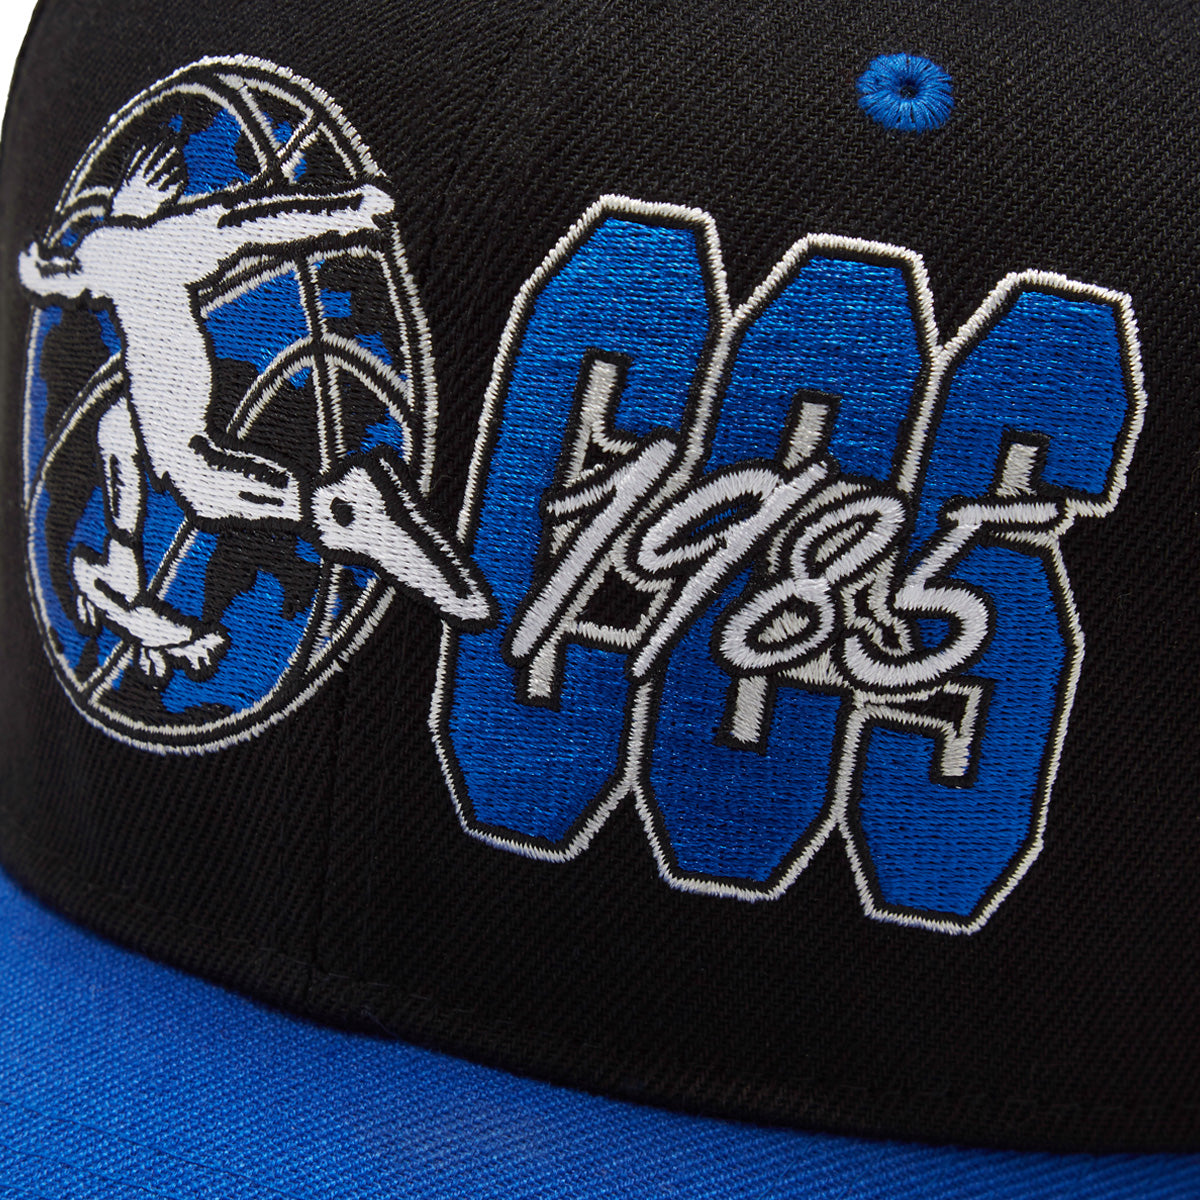 CCS x Mitchell & Ness Hoops Hat - Black/Royal image 4